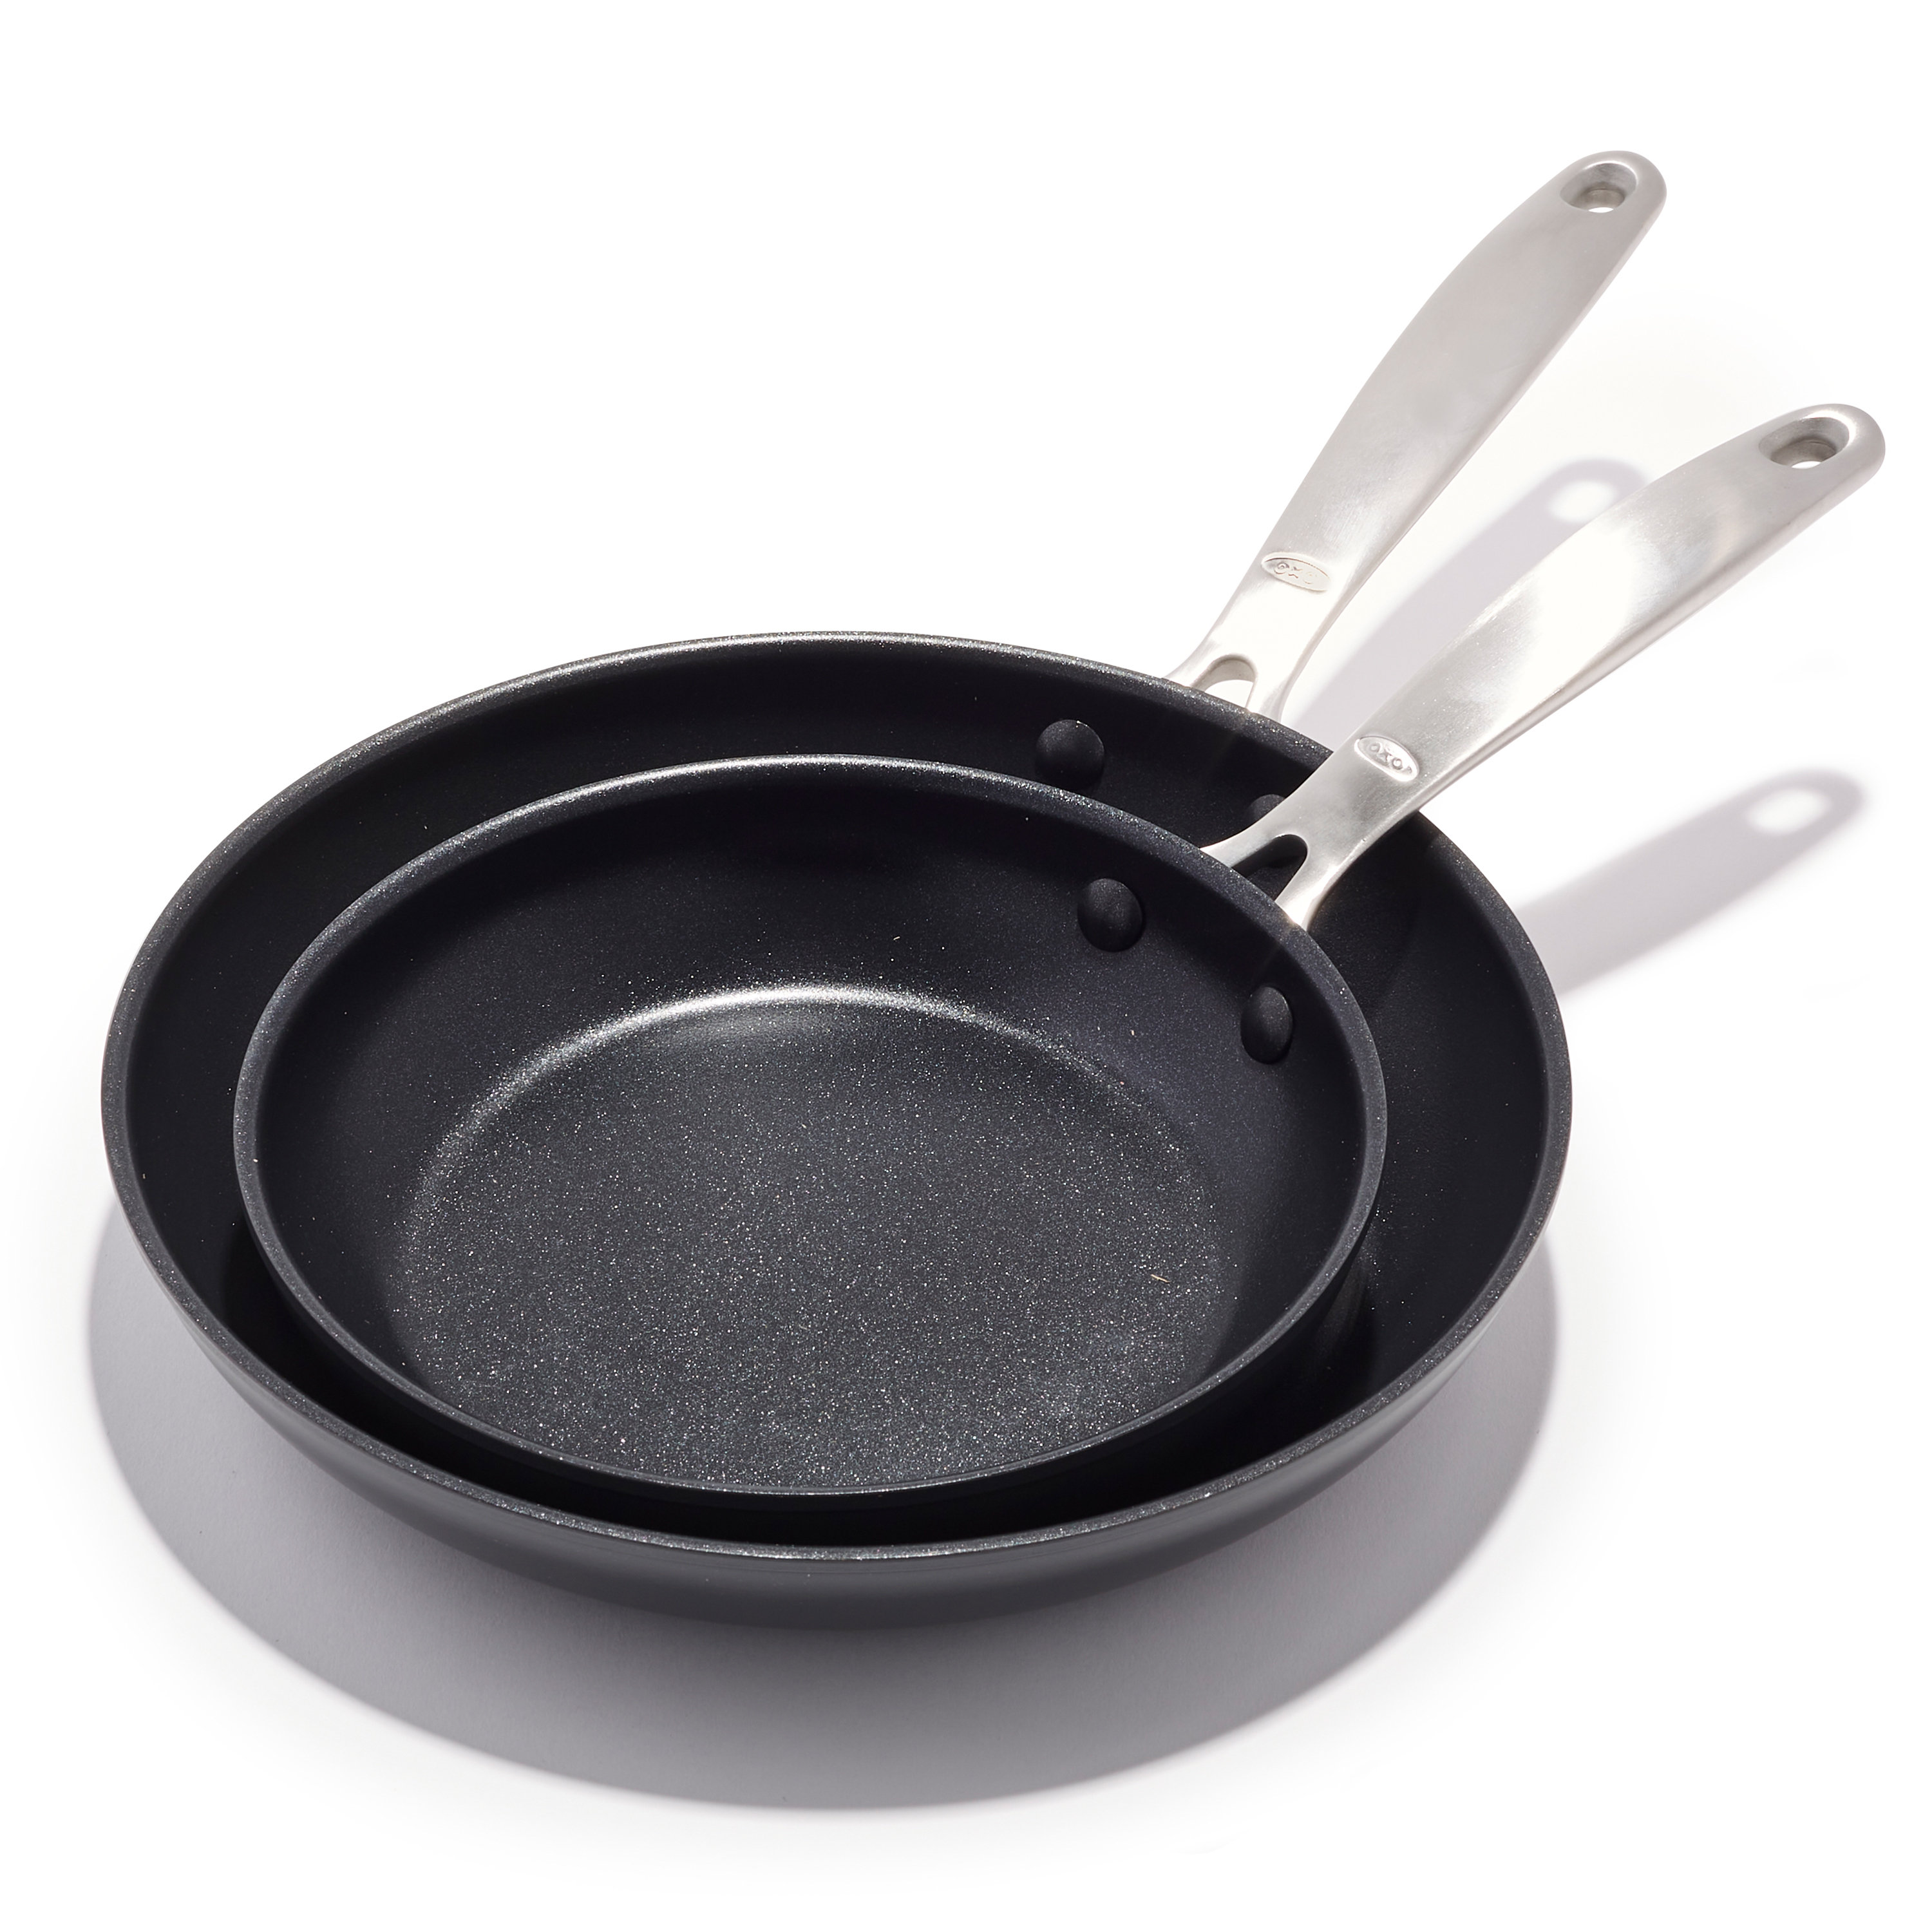 Cuisinart Multiclad Pro 10 Fry Pan - The Peppermill